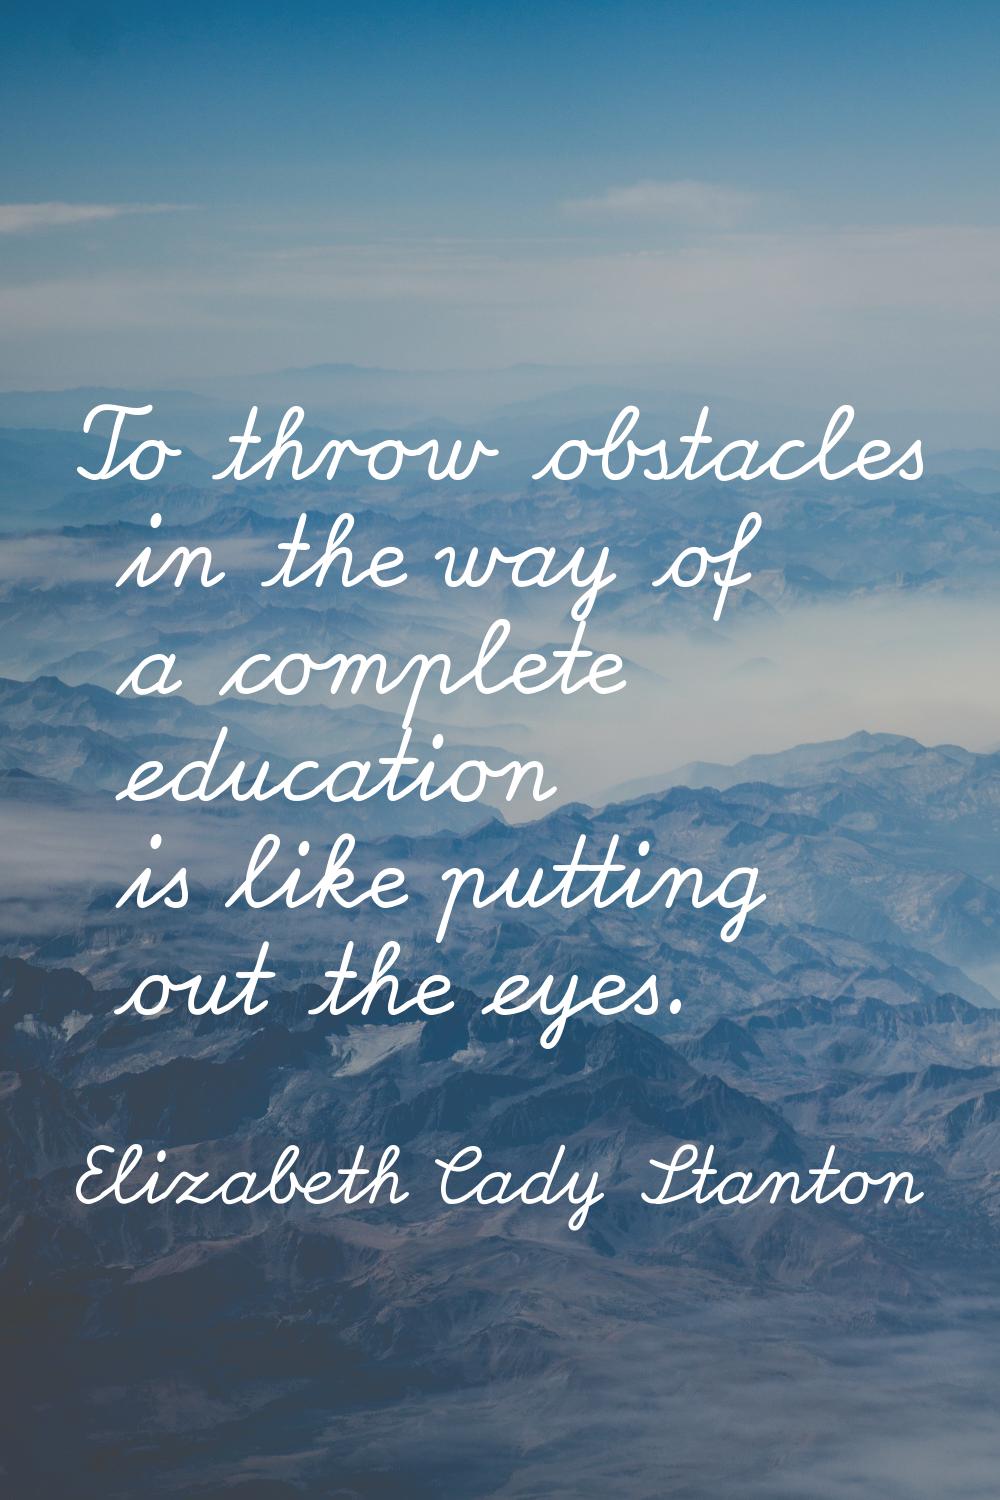 To throw obstacles in the way of a complete education is like putting out the eyes.